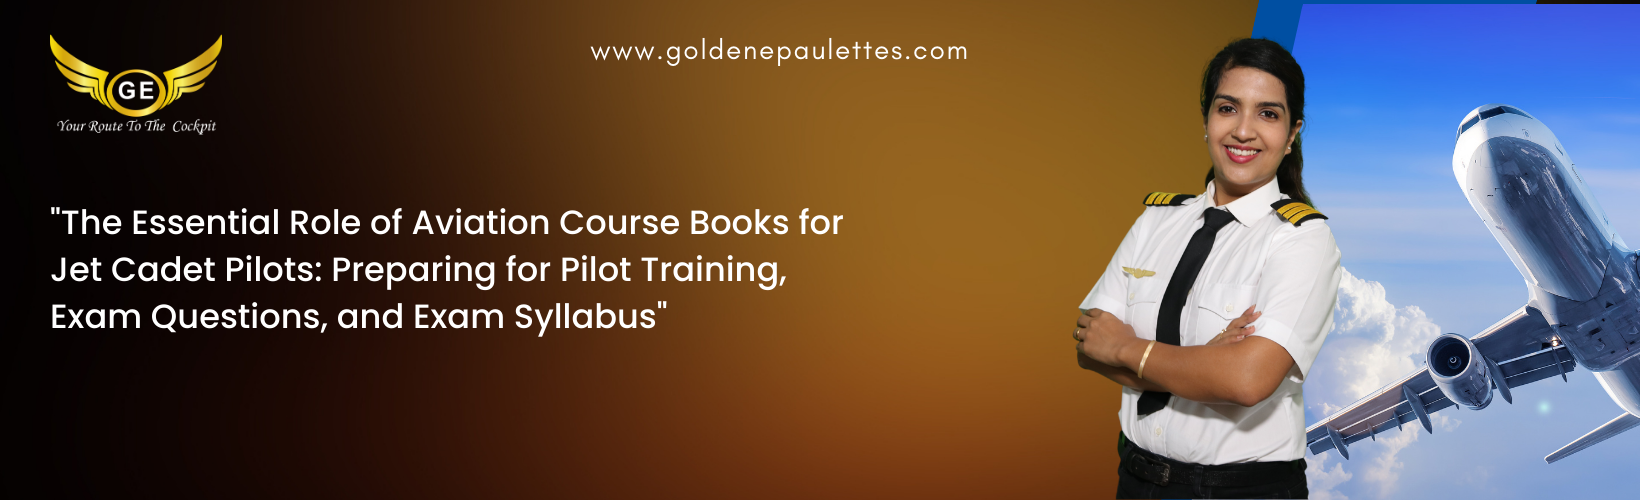 The Best Aviation Classes in India for Jet Cadet Pilots